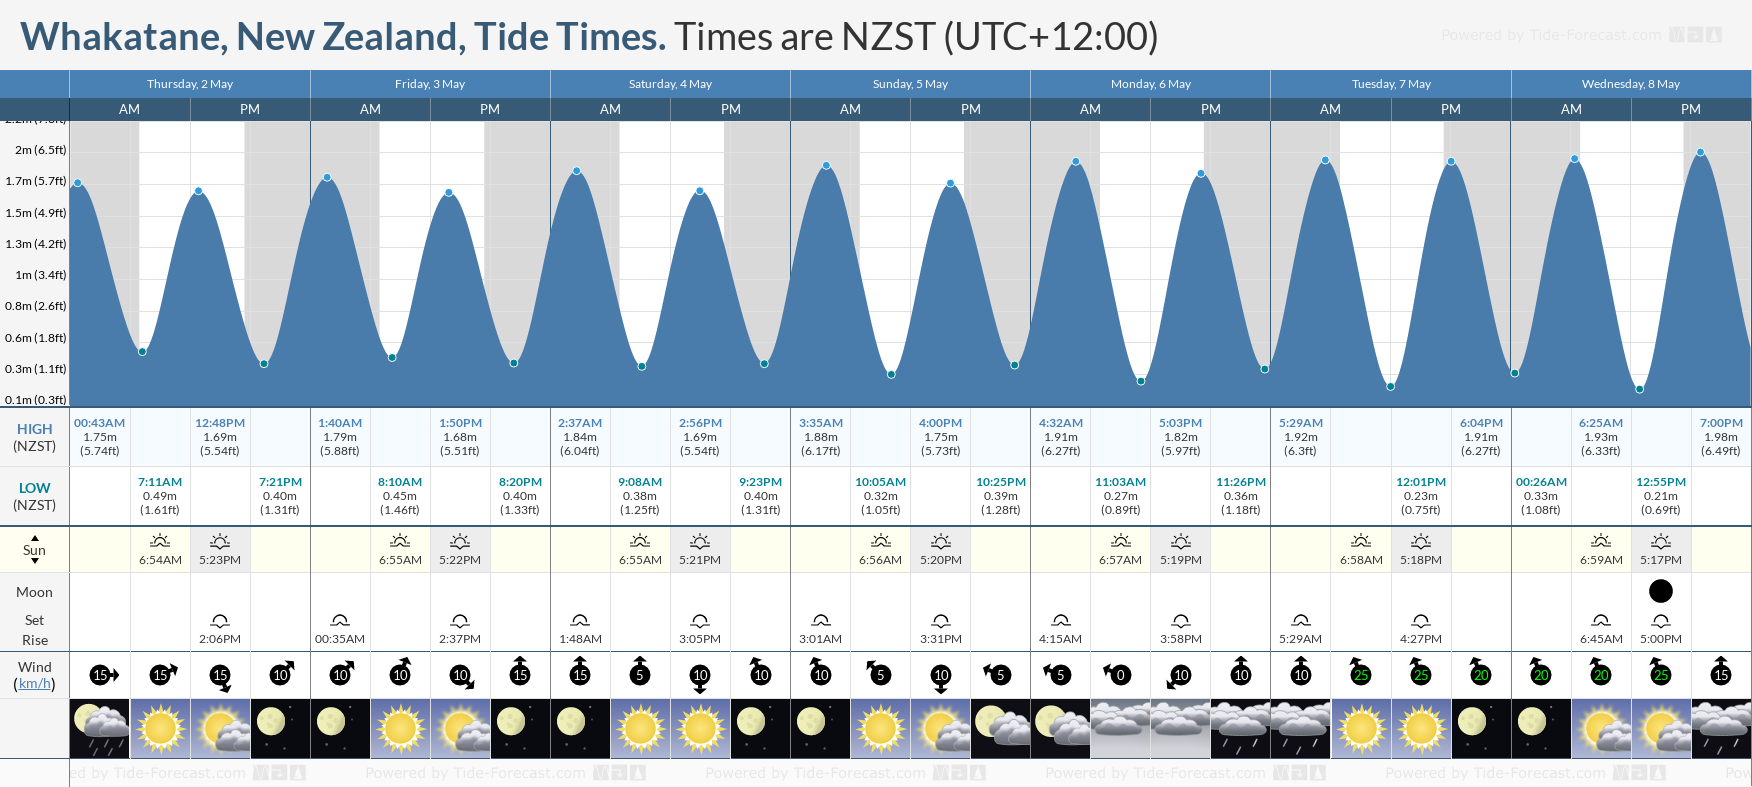 Whakatane, New Zealand Tide Chart including high and low tide tide times for the next 7 days